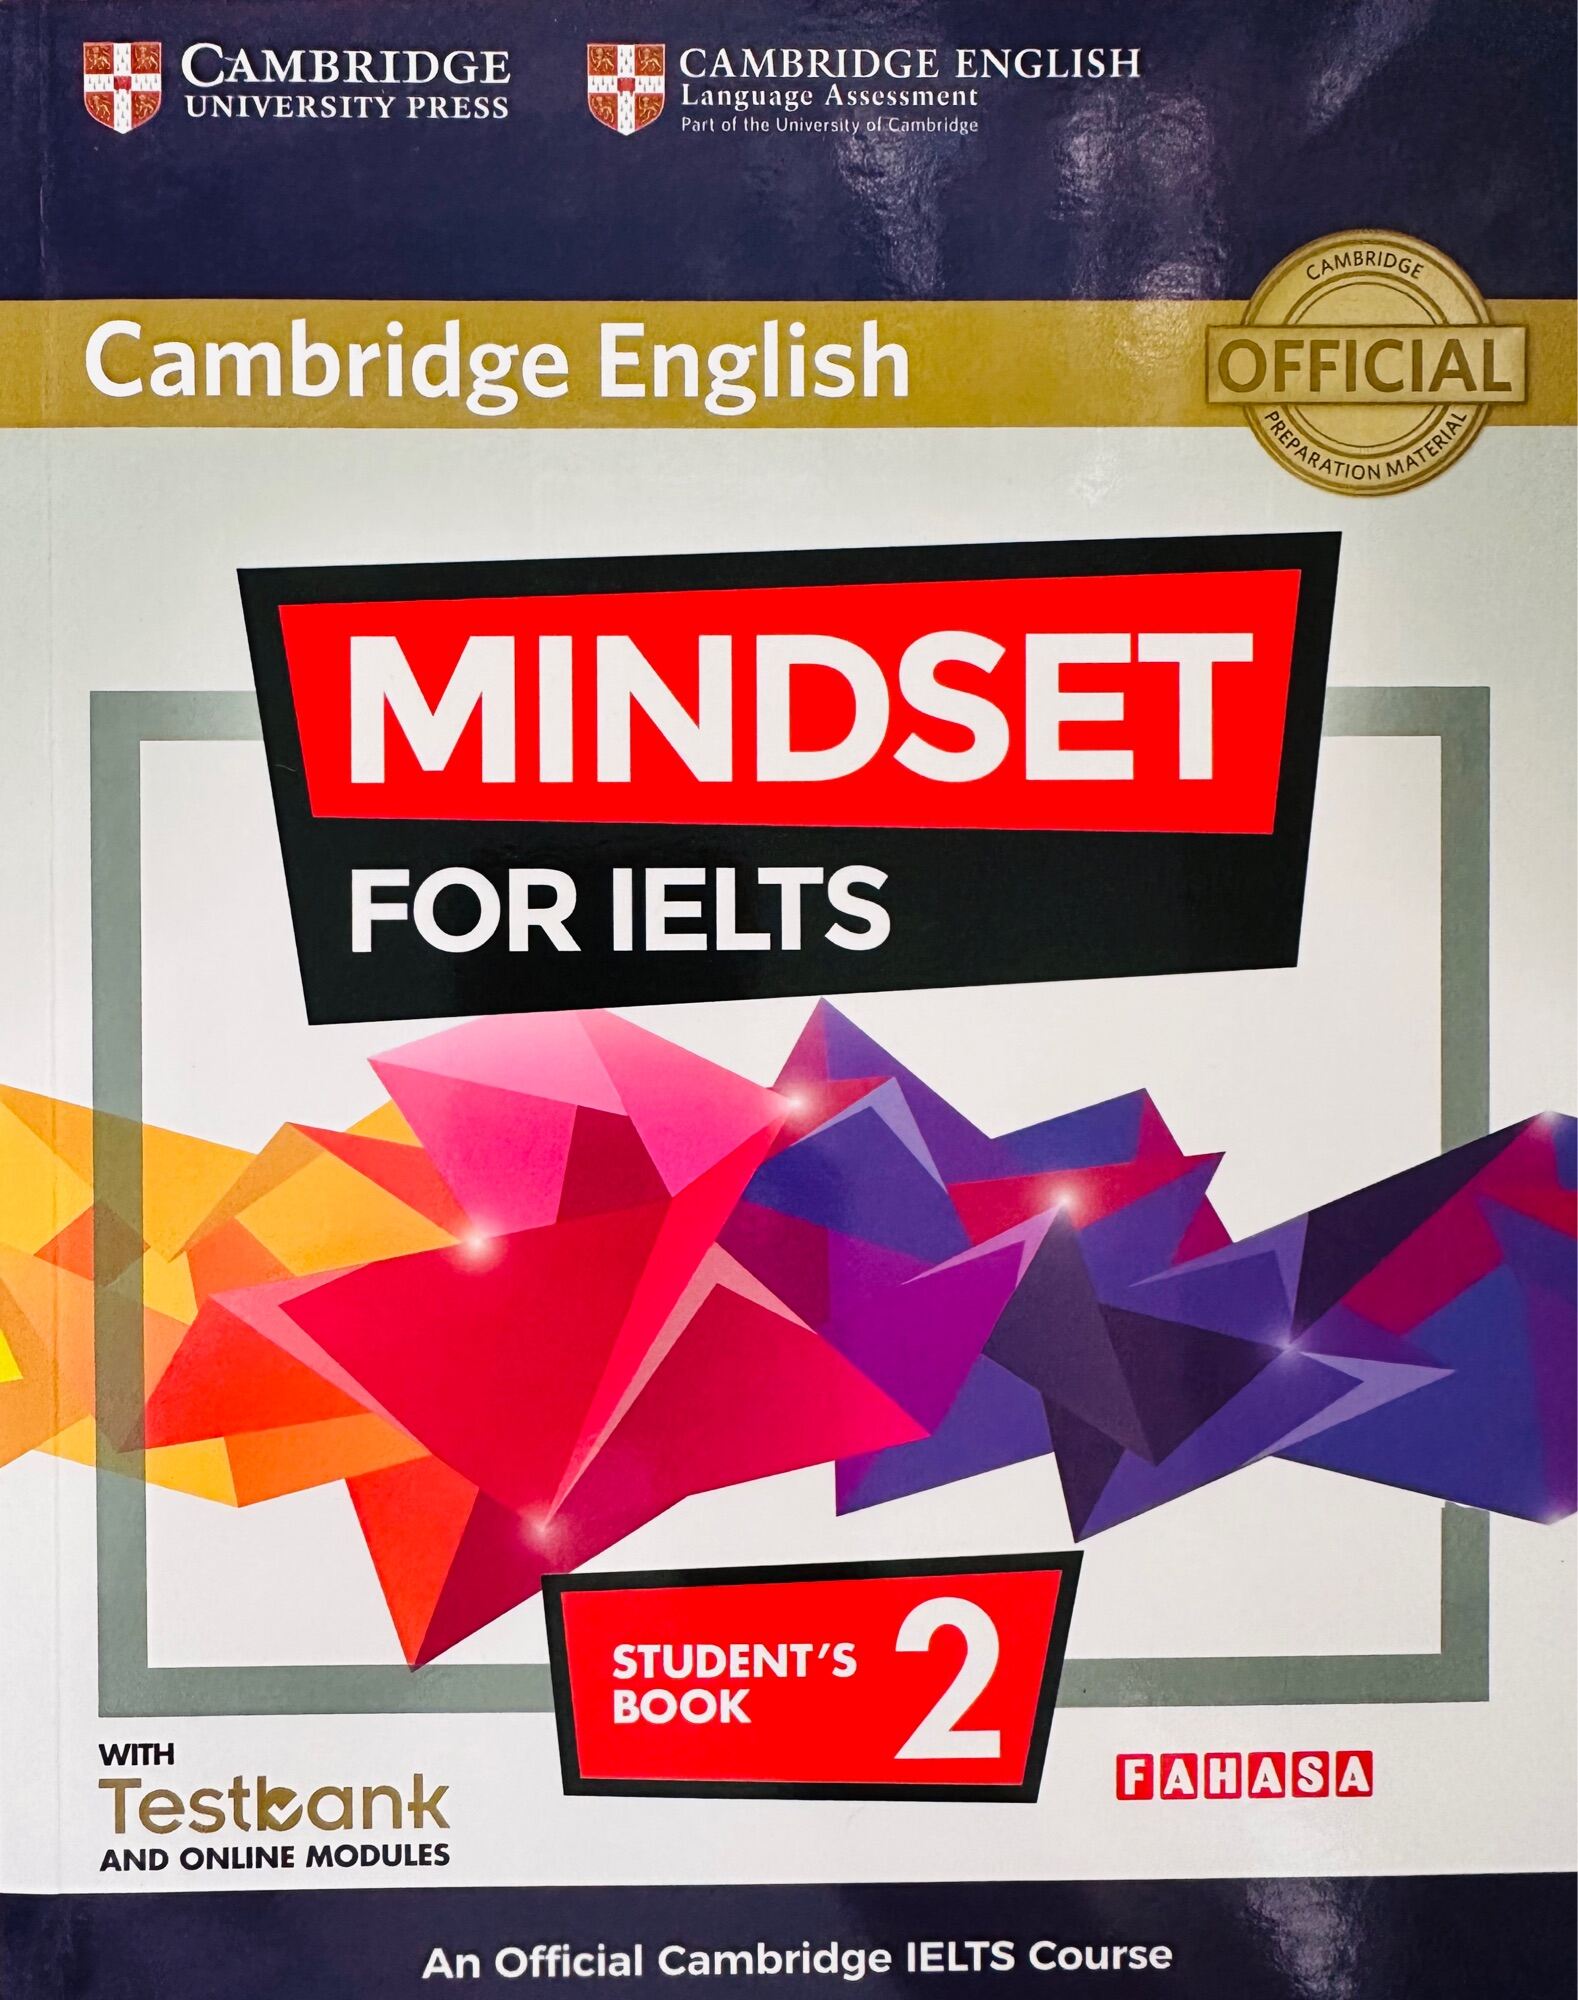 Cambridge English - Mindset For Ielts 2 code for textbank online